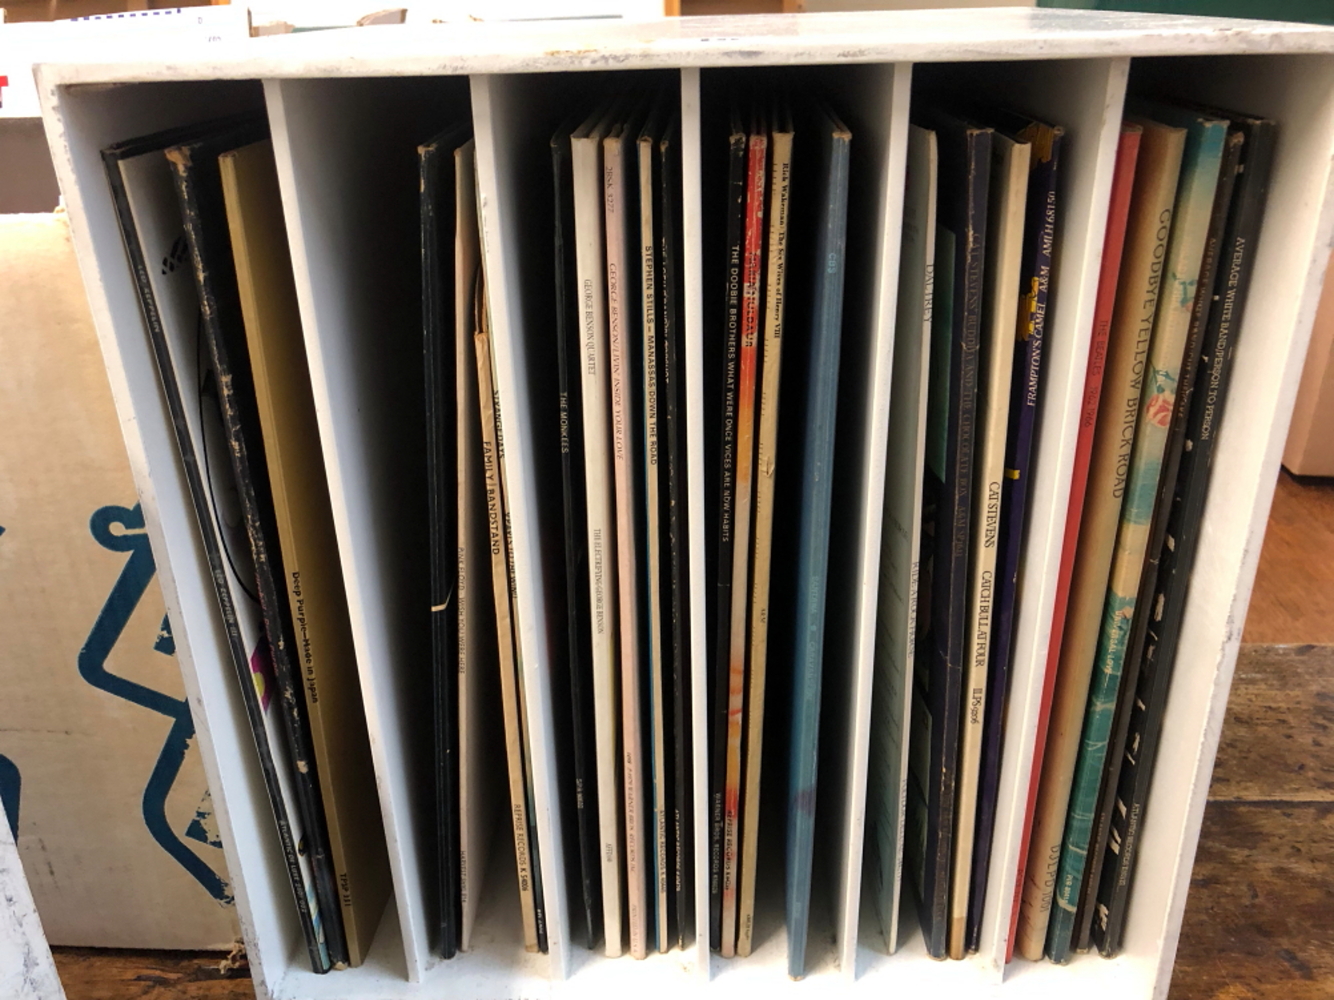 A BOX OF ROCK VINYL RECORDS INCLUDING LED ZEPPELIN III REISSUE, DEEP PURPLE, PINK FLOYD ETC. 25 LP' - Image 2 of 2